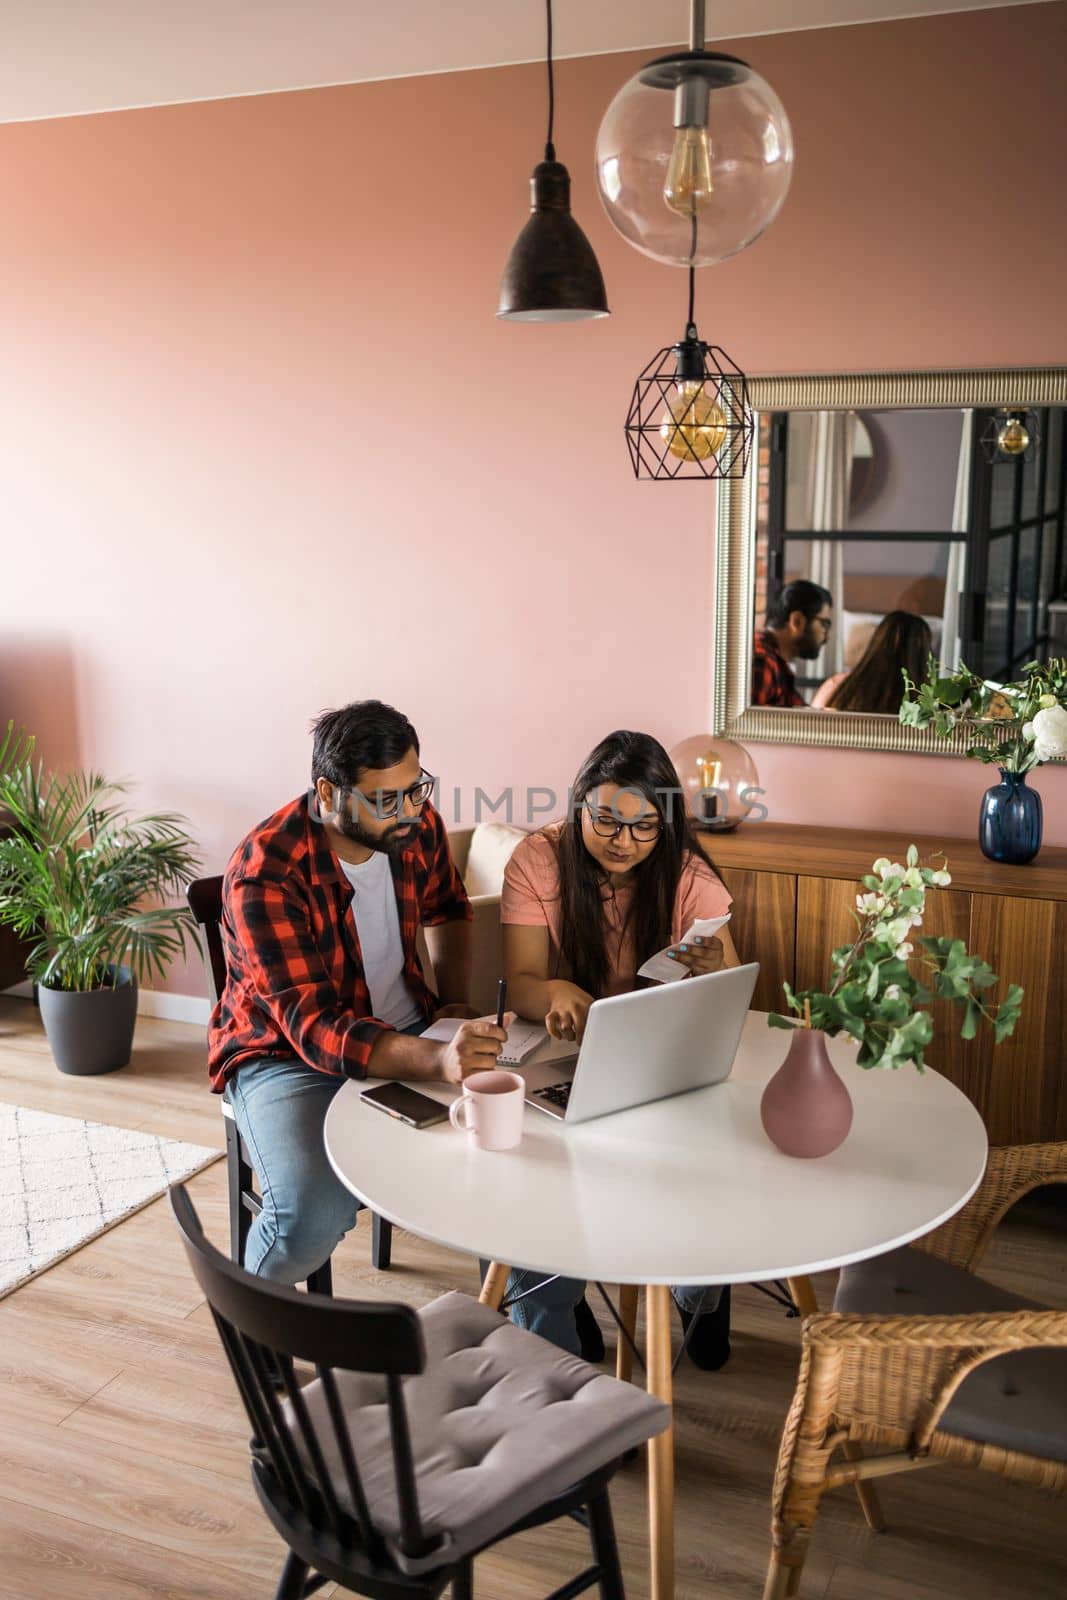 Serious wife and husband planning budget, checking finances, focused young woman using online calculator and counting bills or taxes, man using laptop, online banking services. Family sitting at table in kitchen - economic crisis concept by Satura86